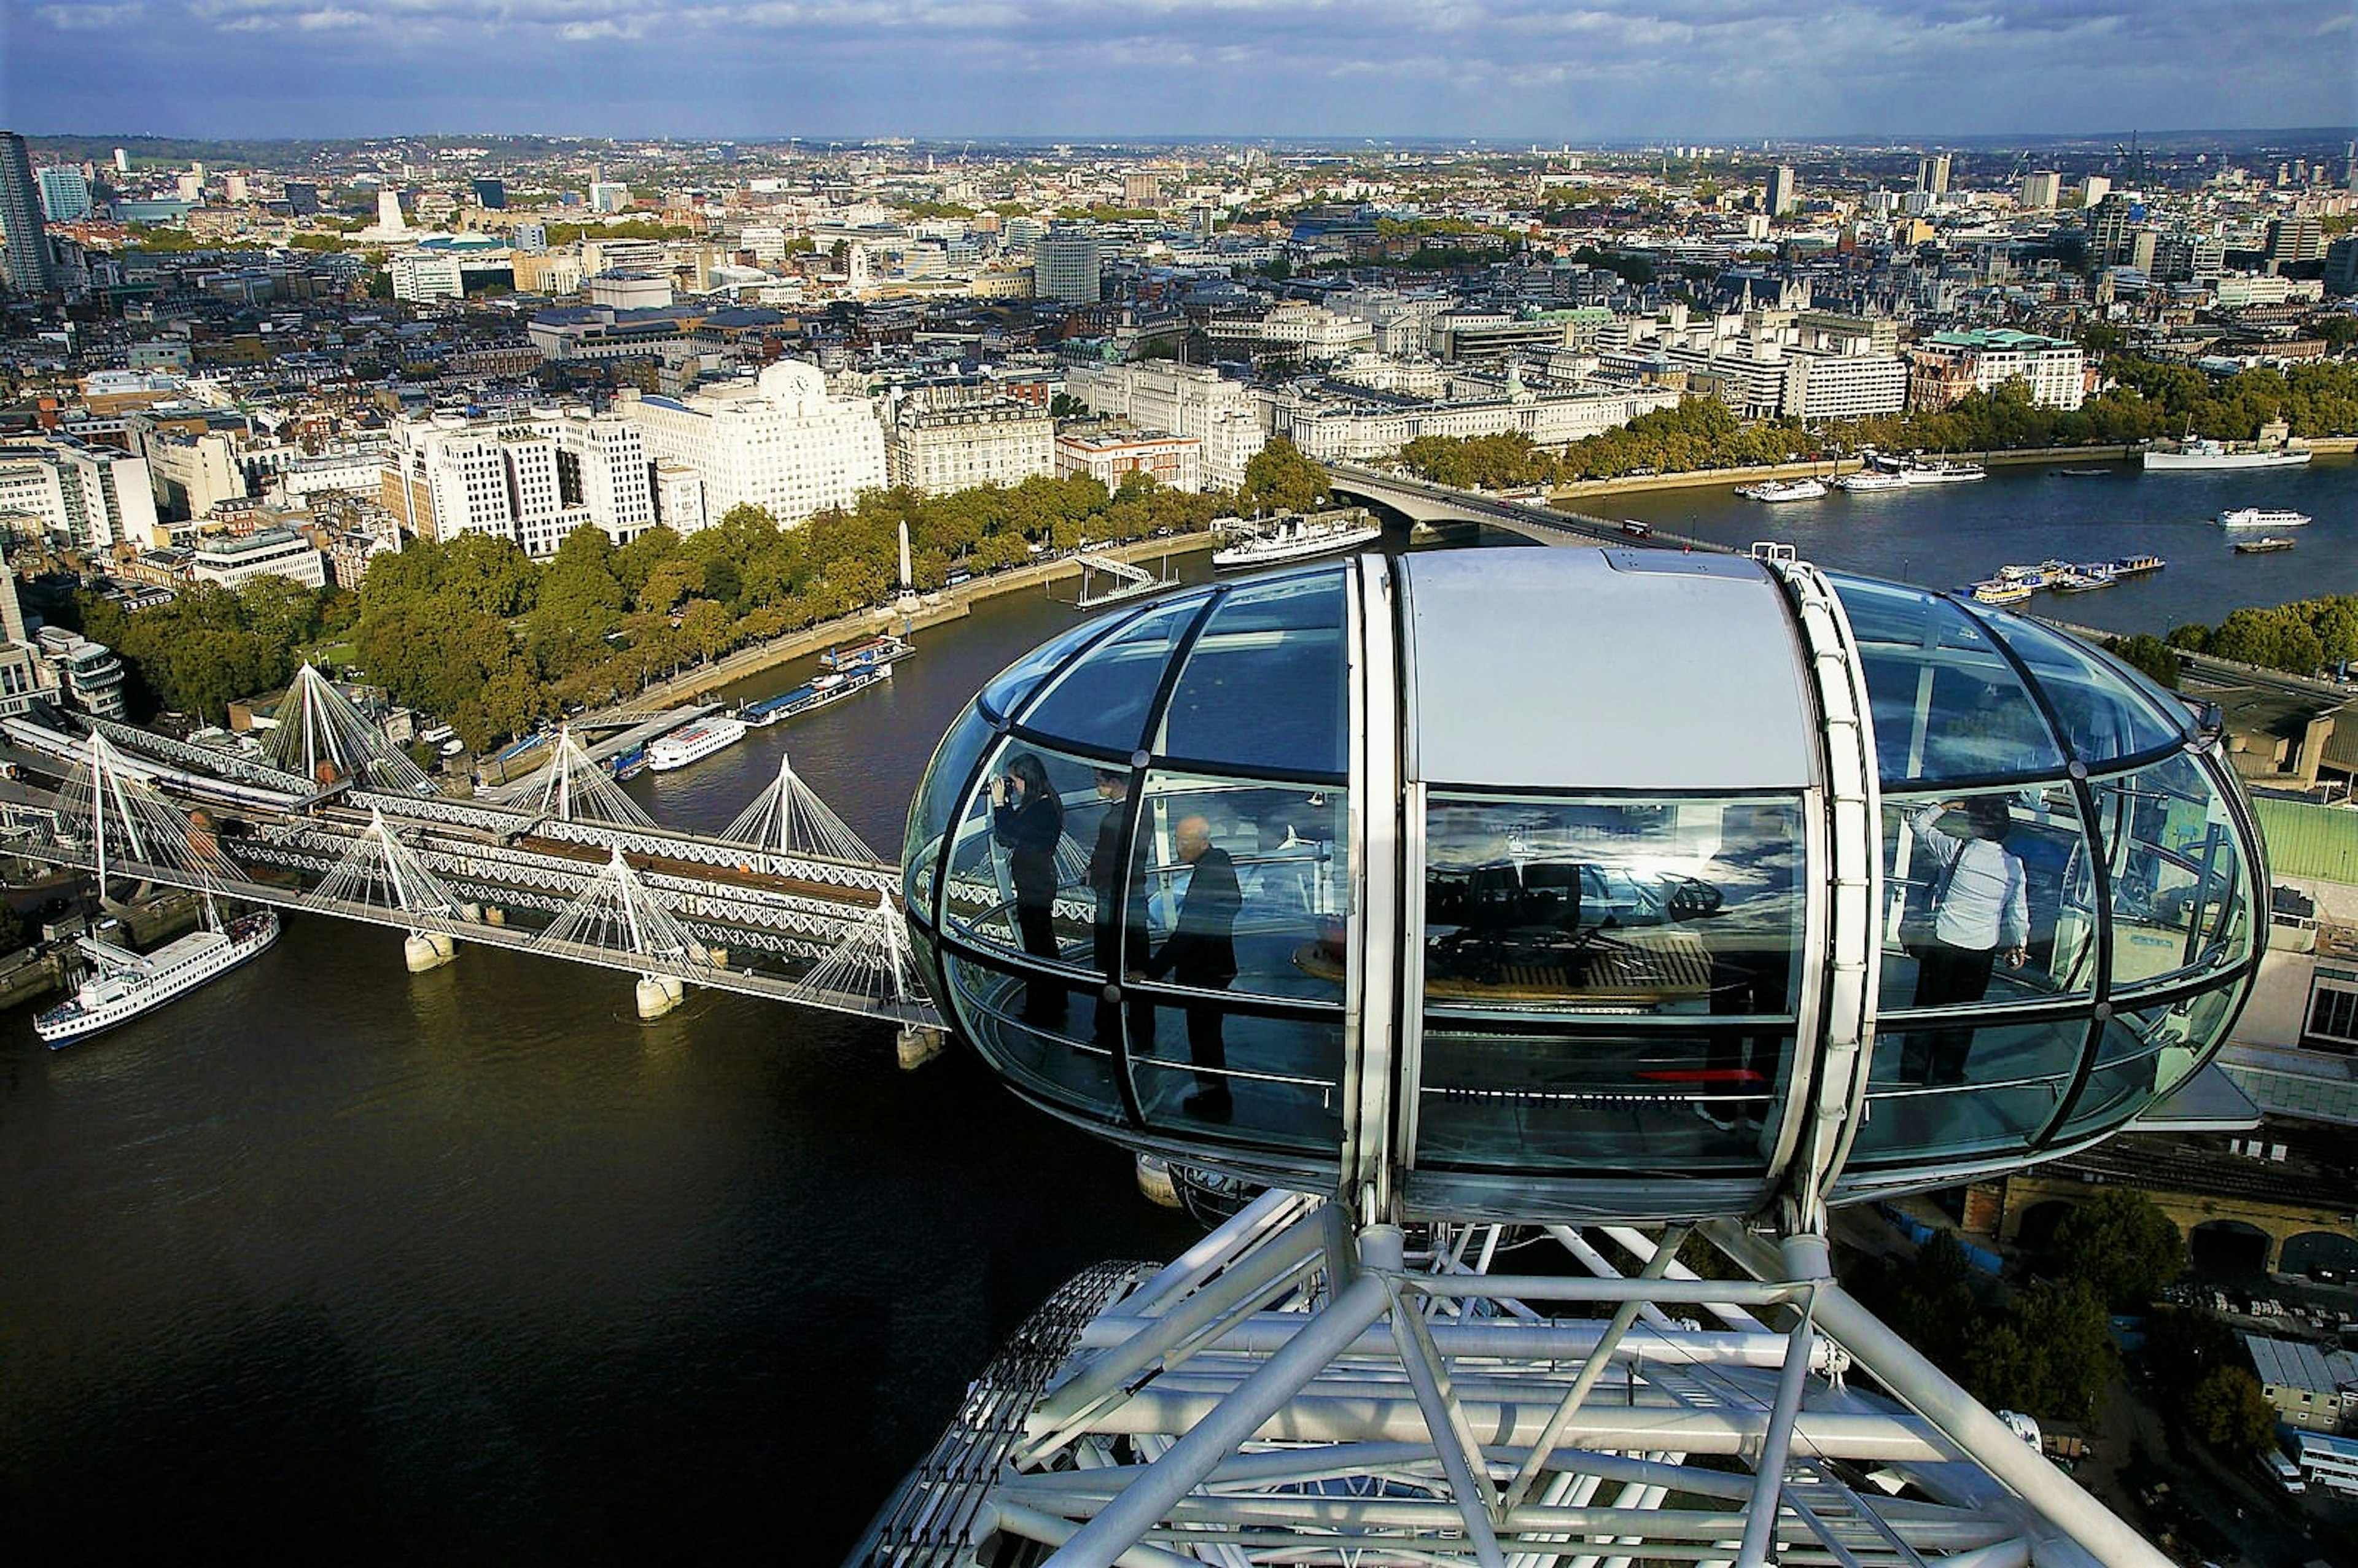 Capsule on the London Eye rises above the Thames